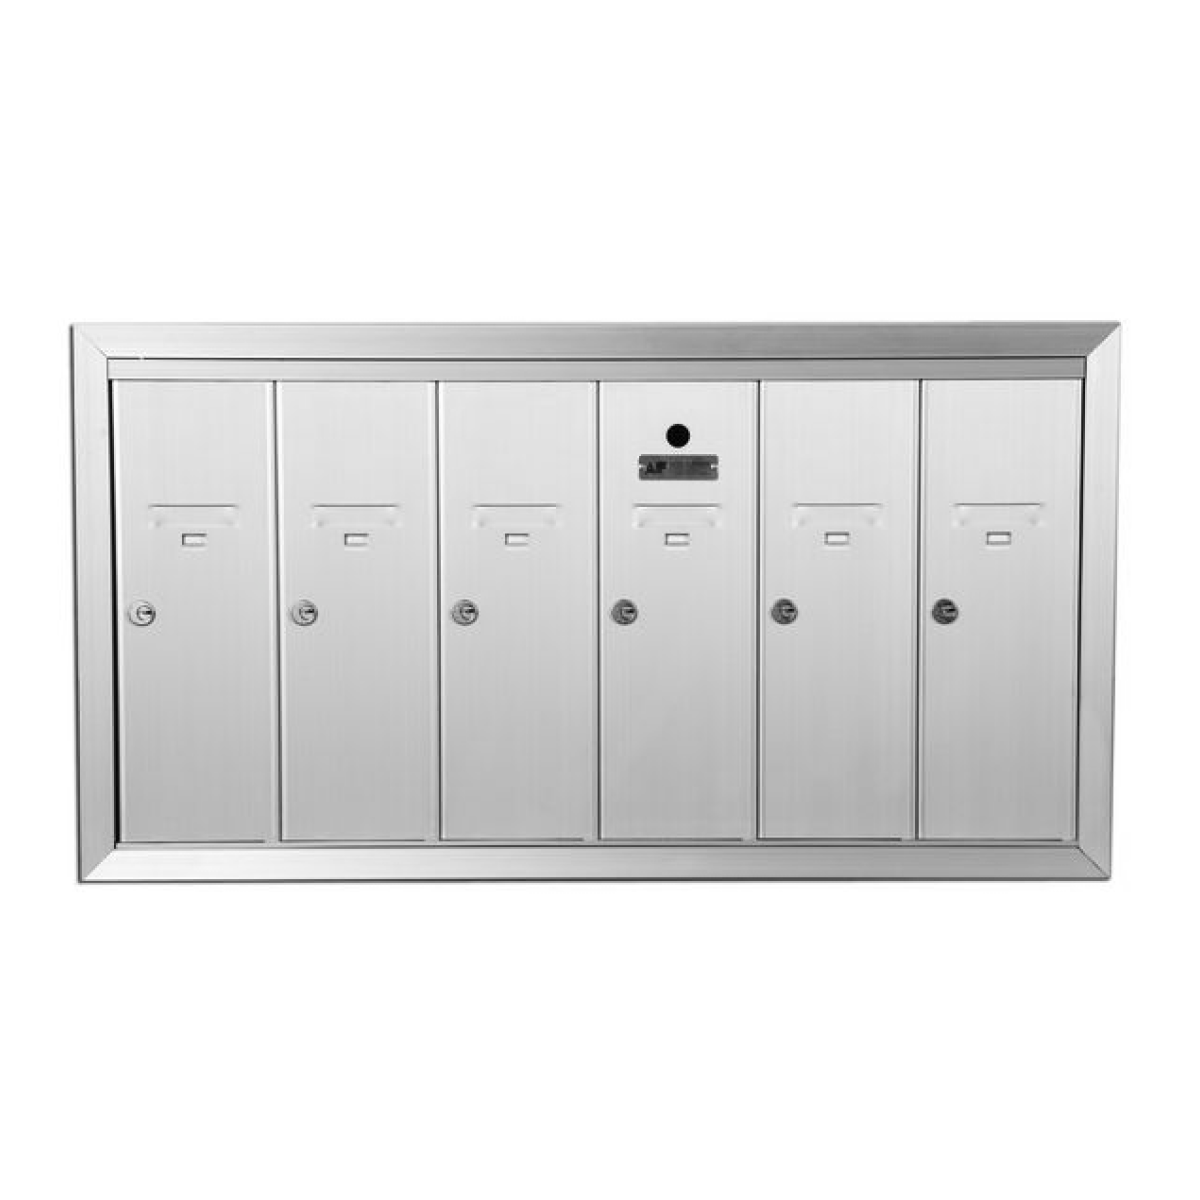 Anodized Aluminum Florence 6 Door Vertical Mailbox Product Image